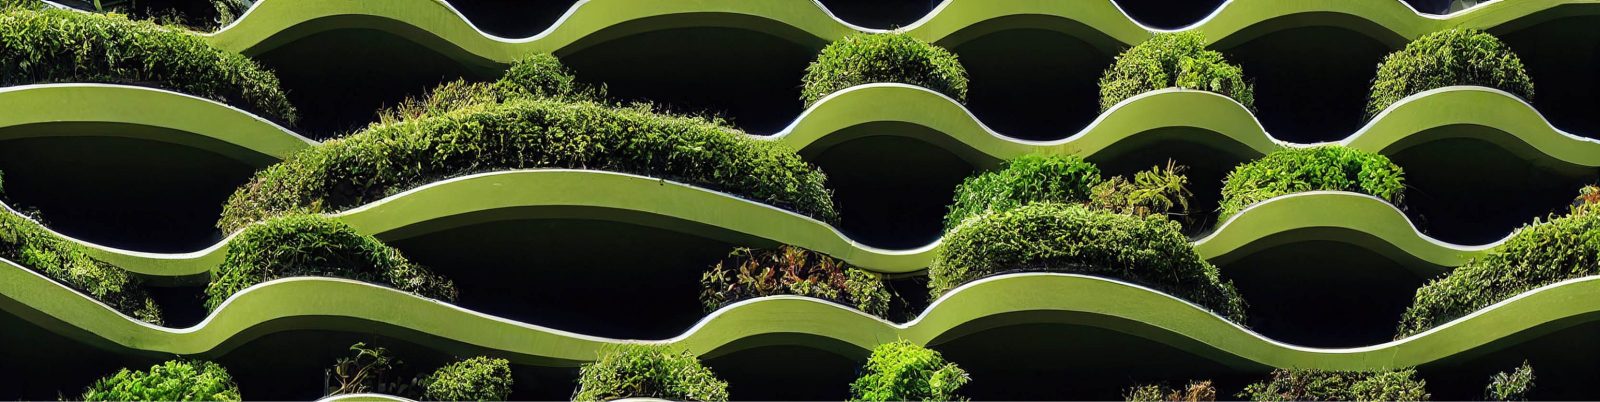 Three approaches for sustainable facade design